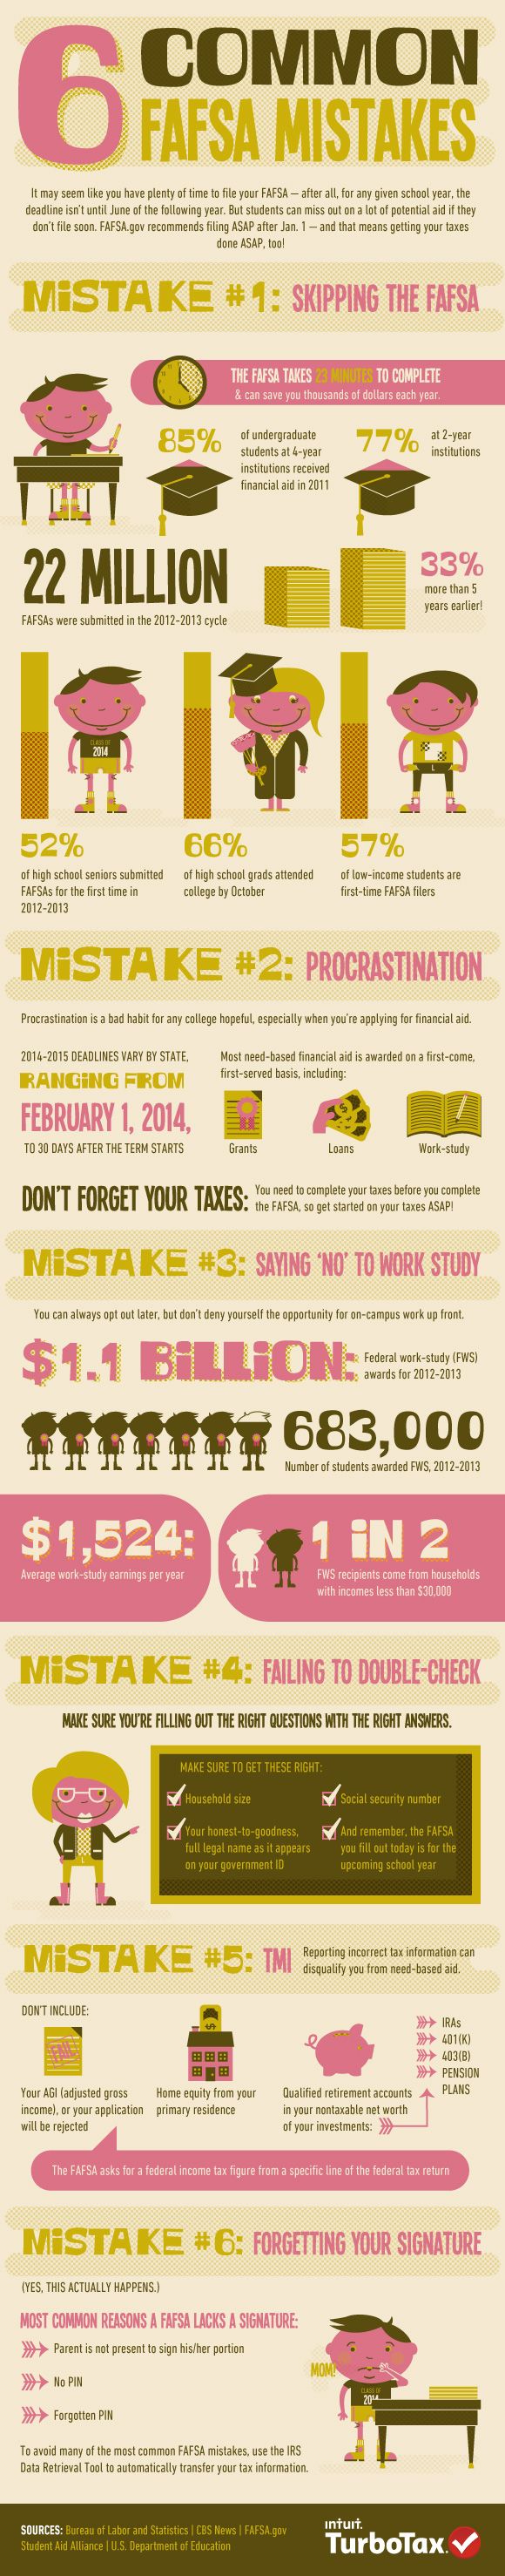 It may seem like you have plenty of time to file your FAFSA, but students can miss out on a lot of potential aid if they don’t file soon. One of the biggest mistakes can be procrastinating on your taxes because your taxes need to be finished before you can complete your FAFSA. Let’s take a look at the 6 common FAFSA mistakes to make sure you avoid them when filing this year.